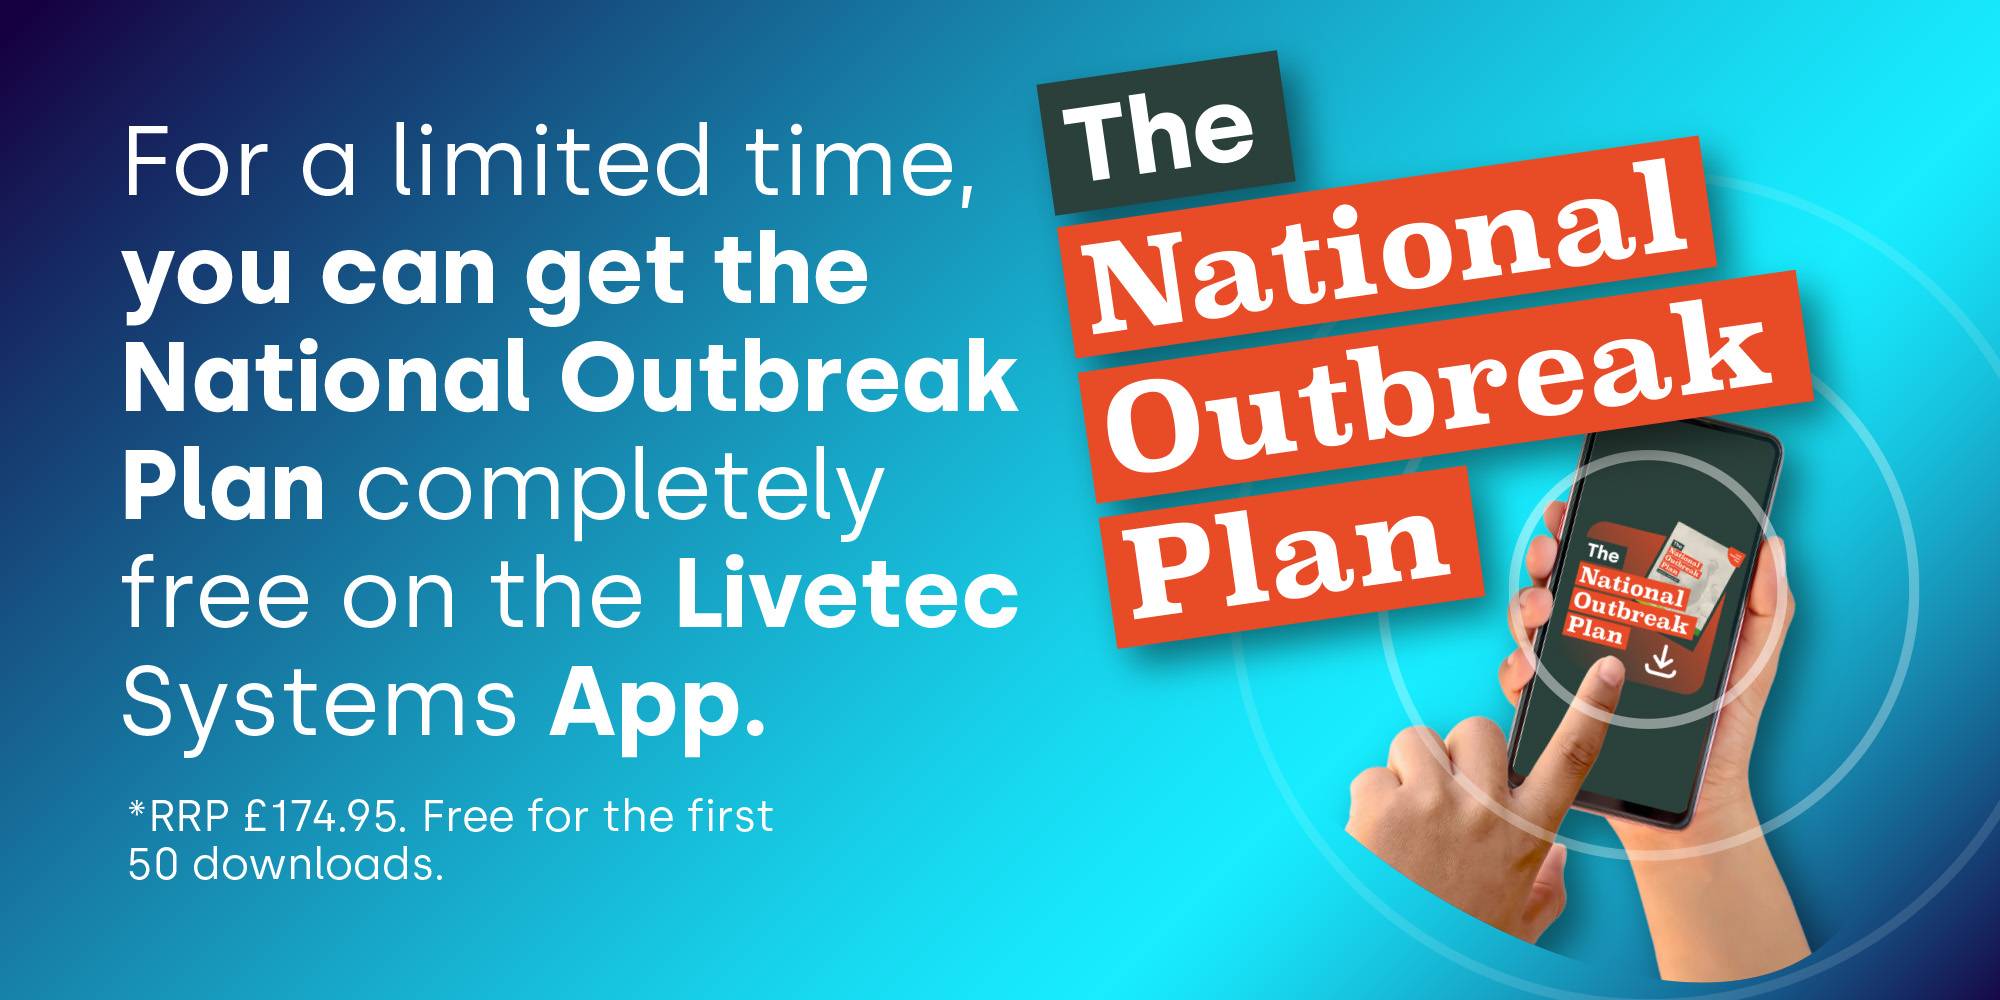 Download the Livetec National Outbreak Plan for free on the Livetec Systems App and stay prepared for an emergency.